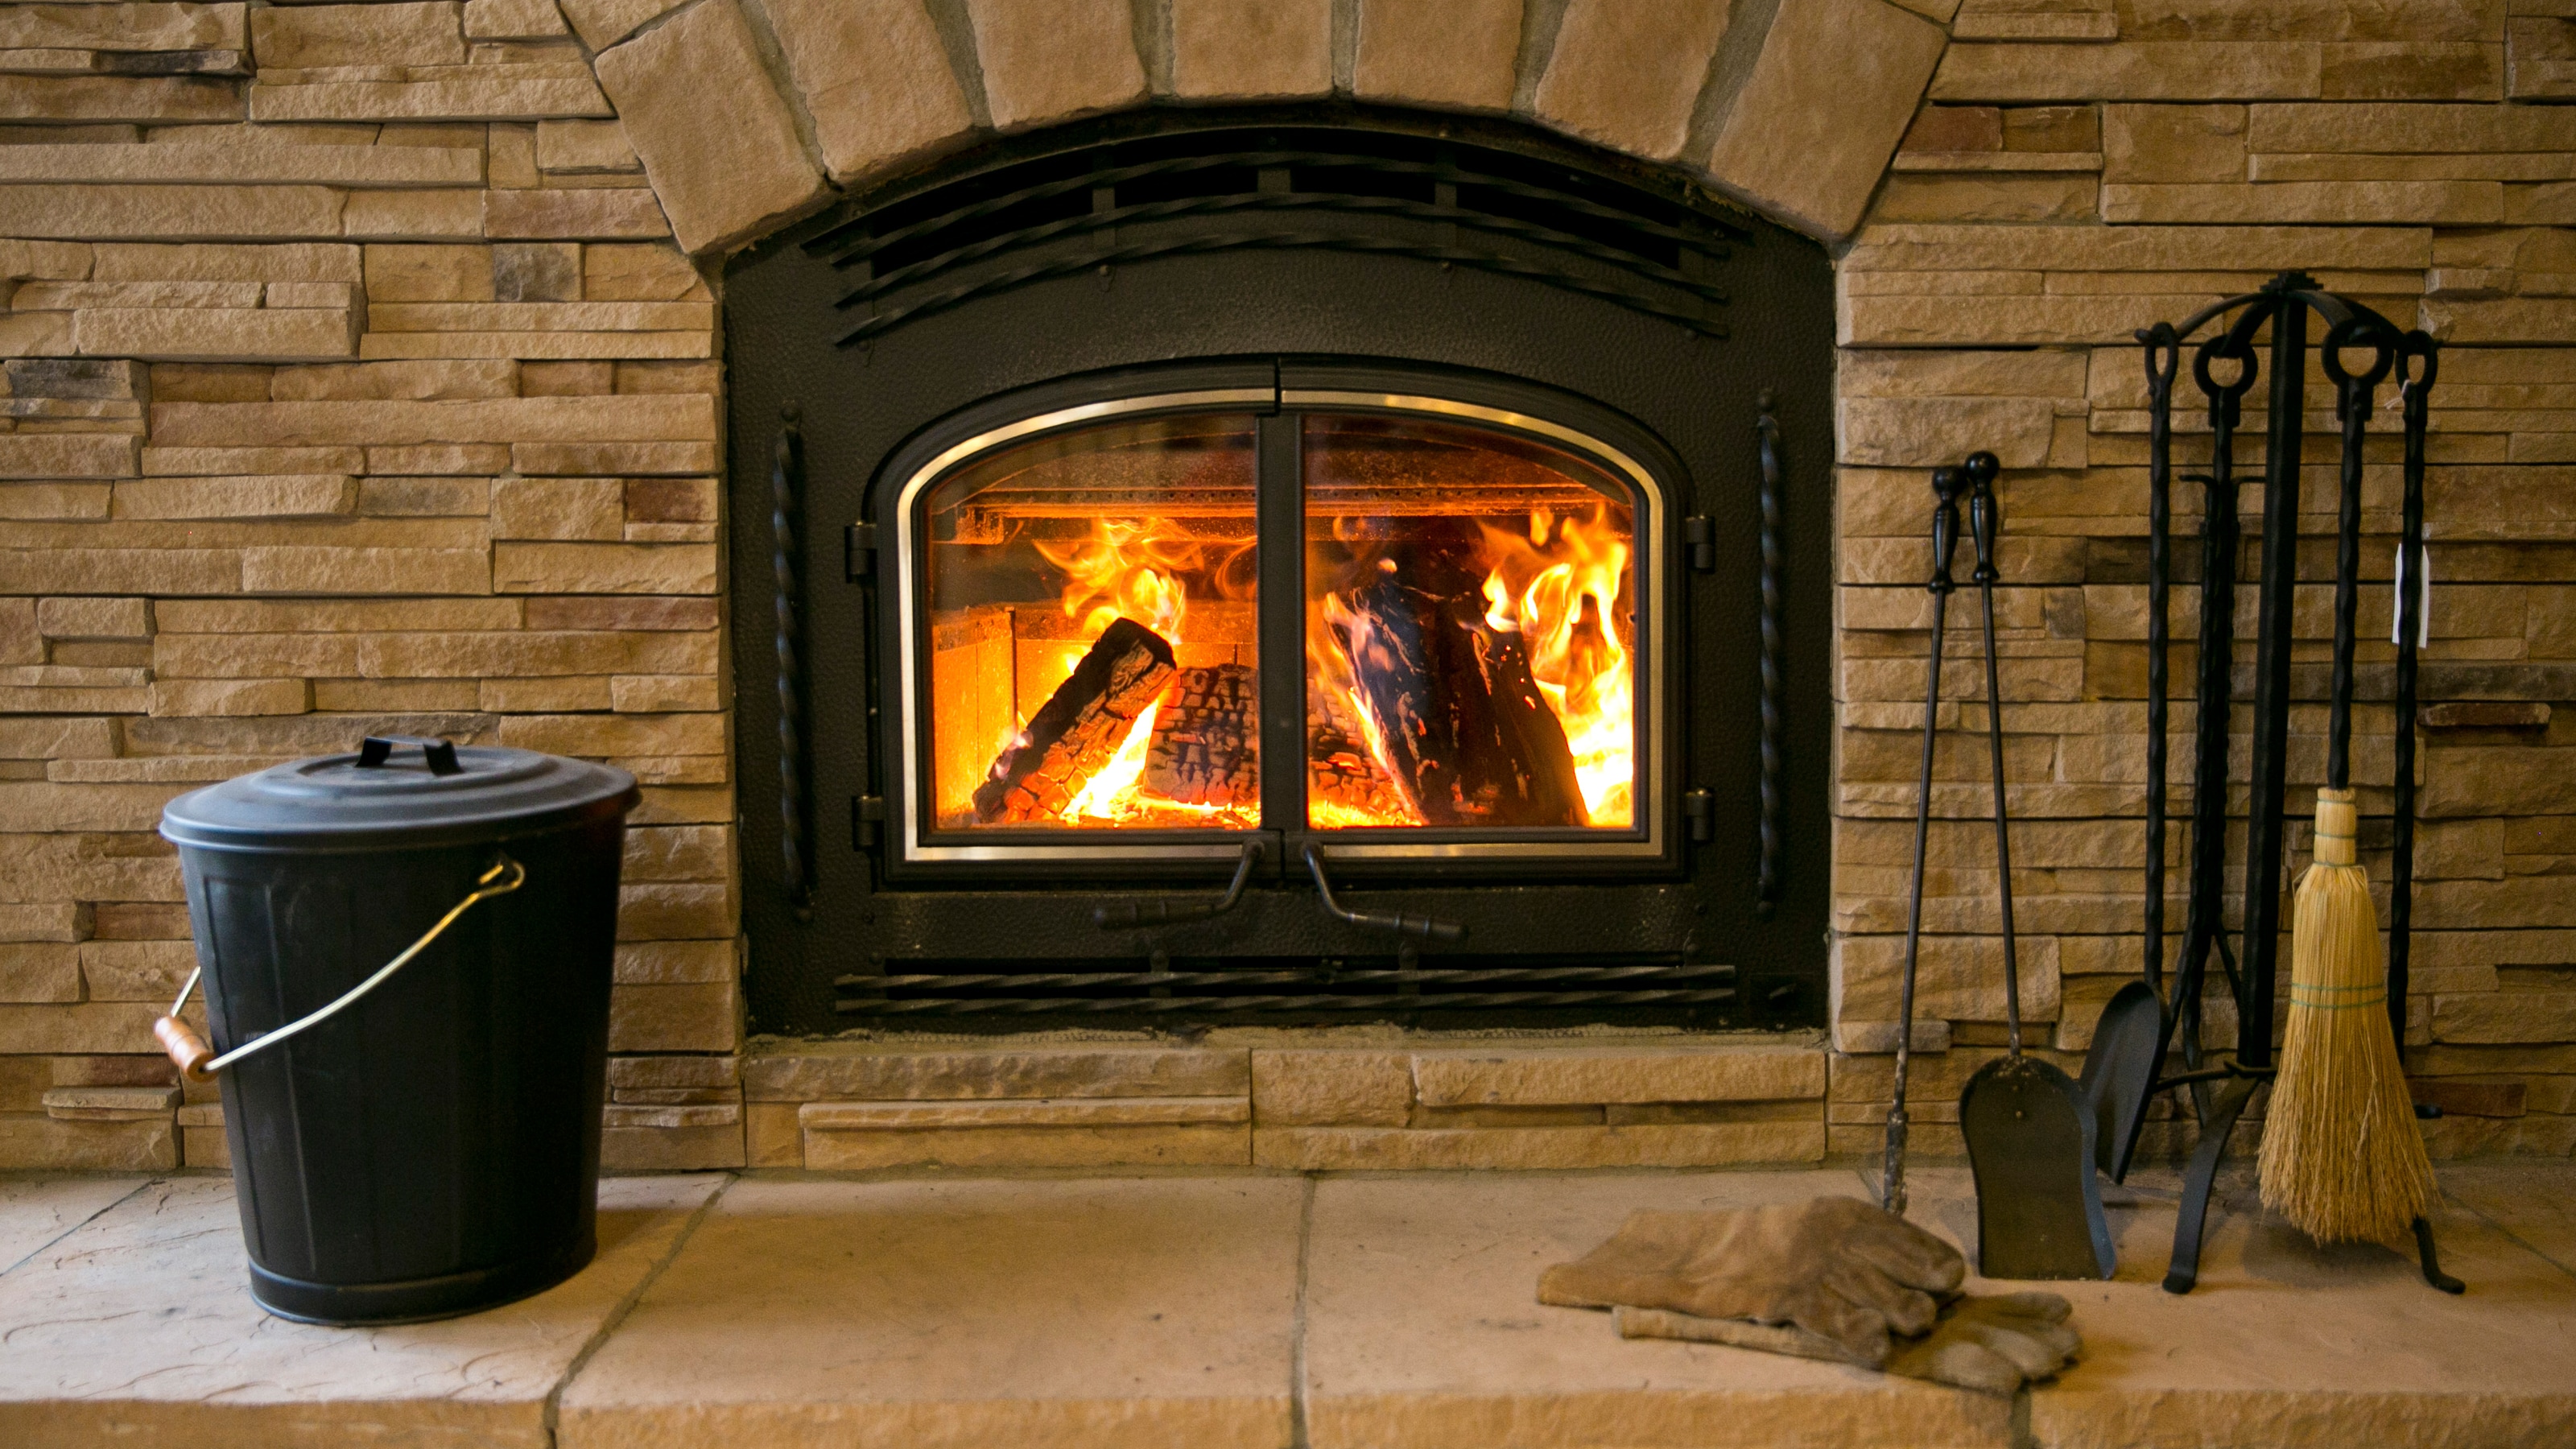 Fireplace Screen for Gas Fireplace Inspirational How to Convert A Gas Fireplace to Wood Burning